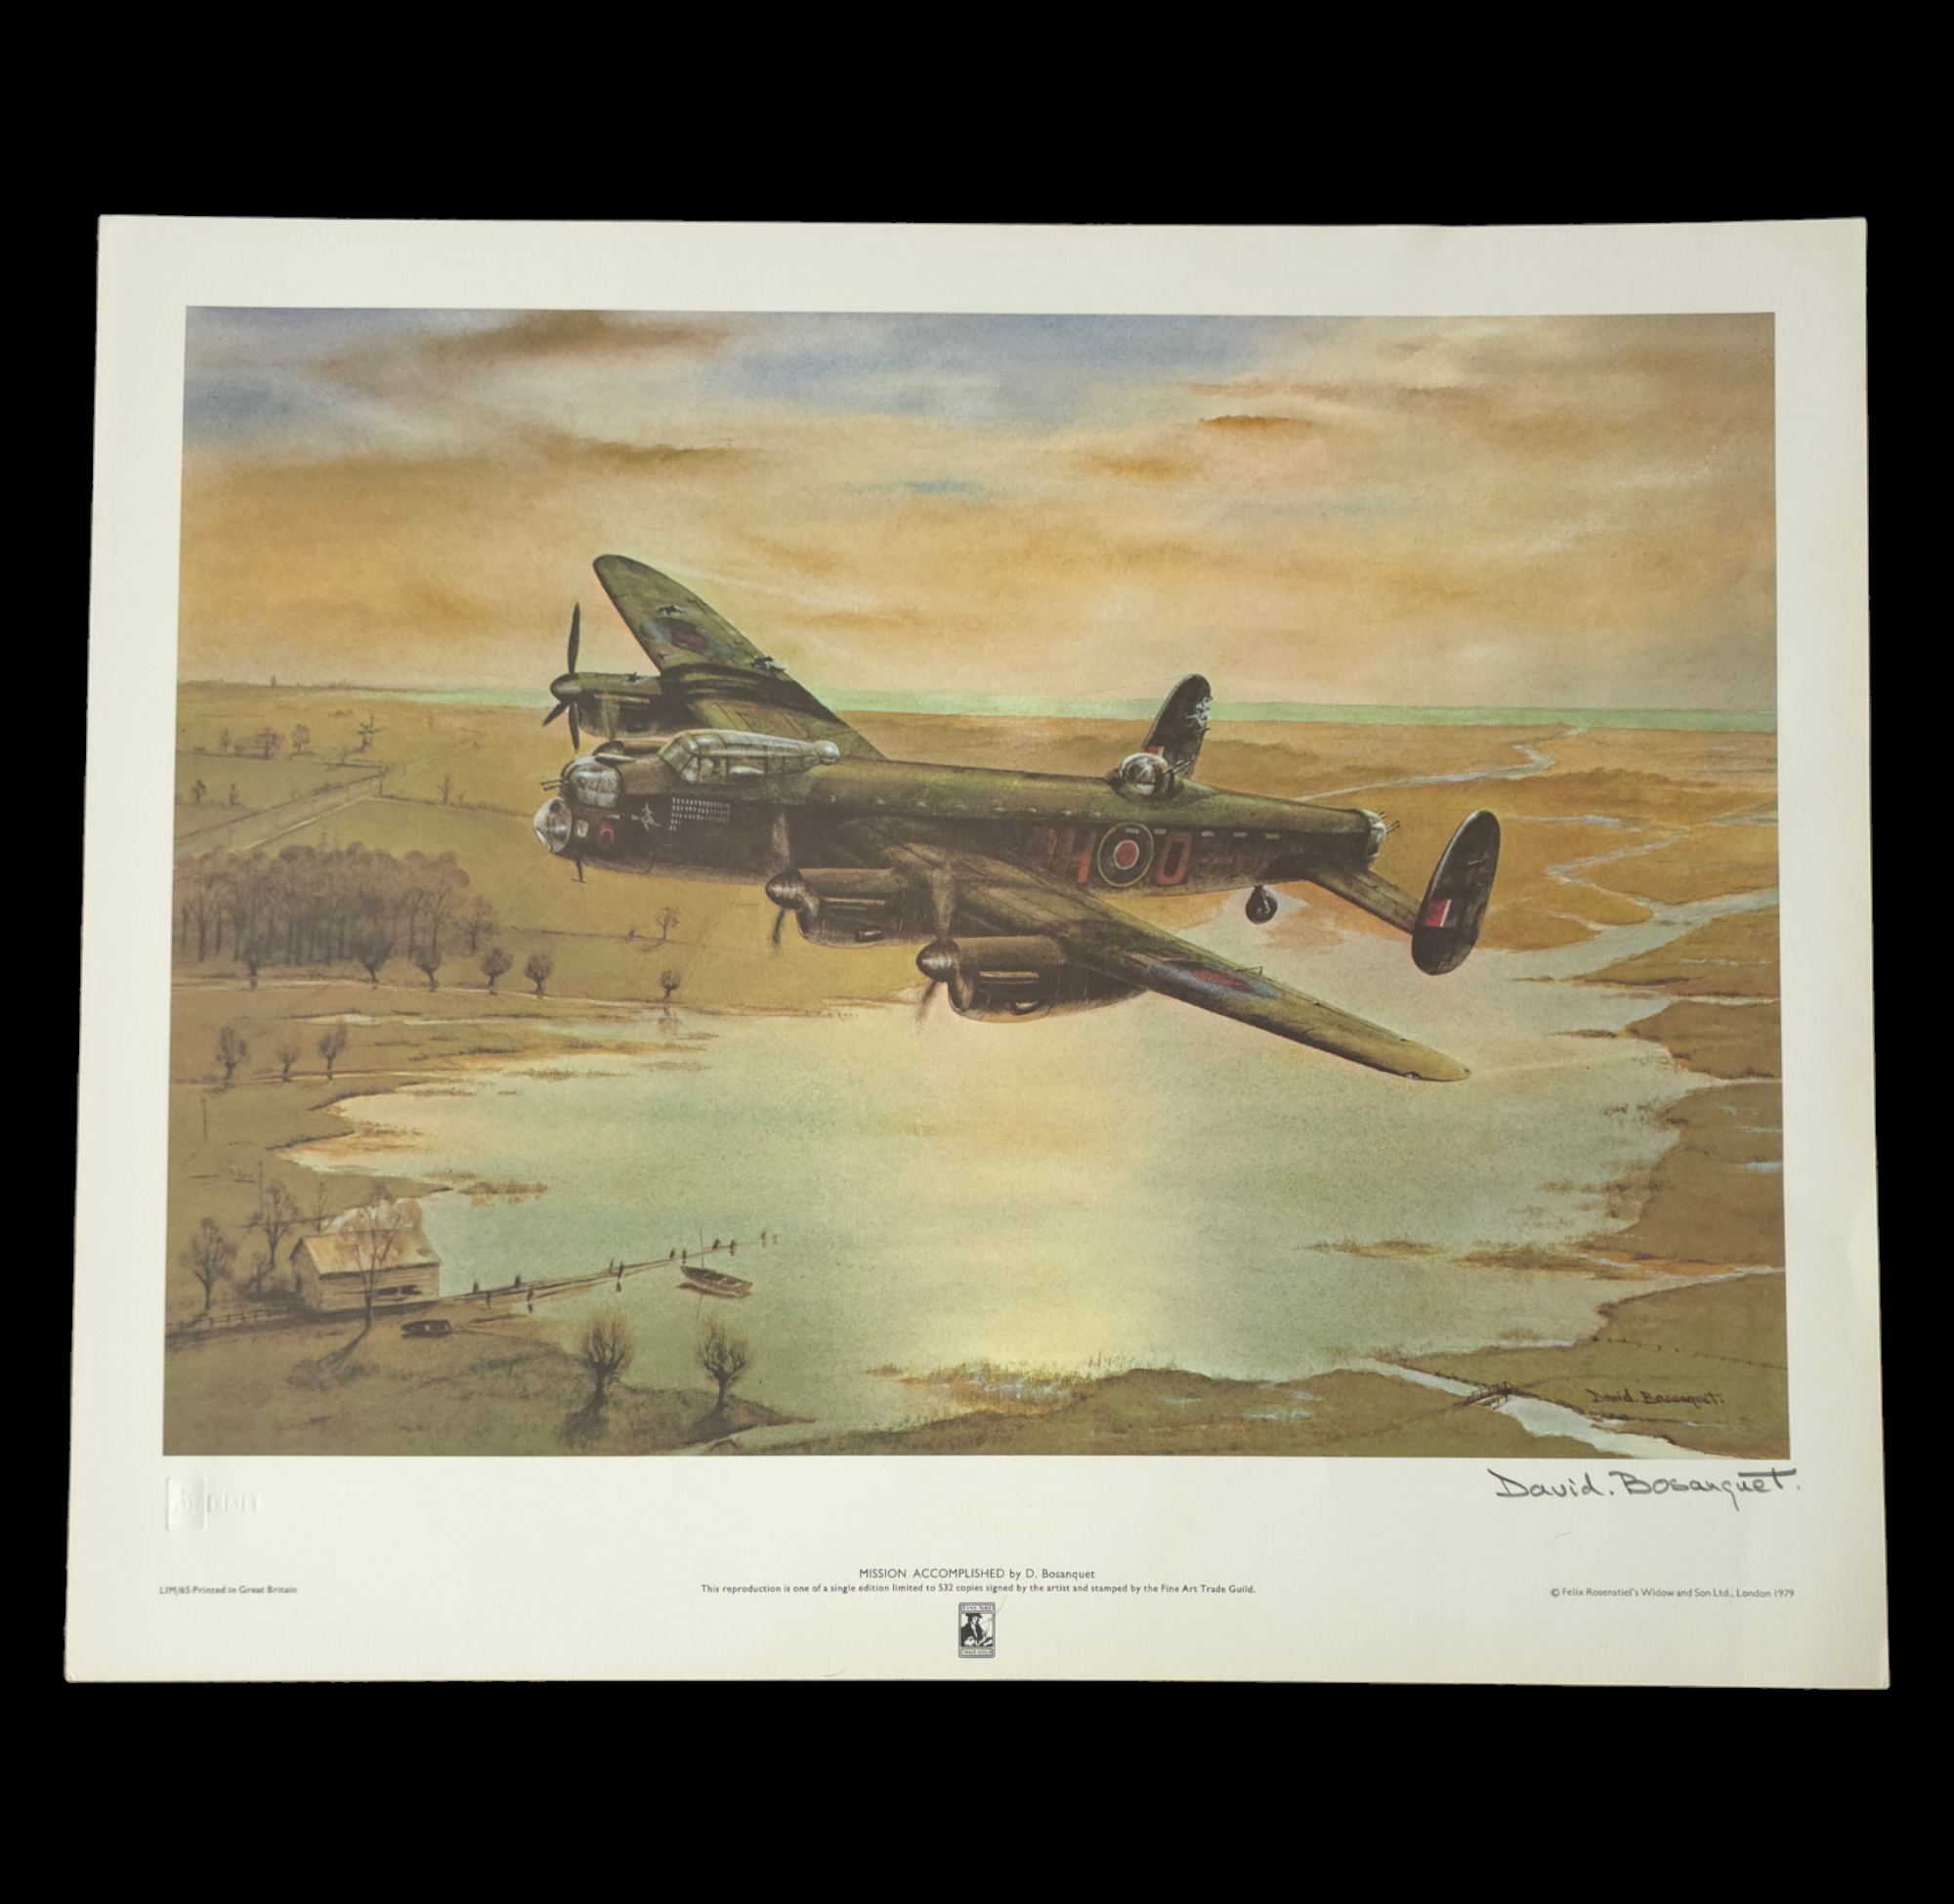 WW2 Colour Print Titled Mission Accomplished by David Bosanquet. Signed in Pencil by David Bosanquet - Image 3 of 3